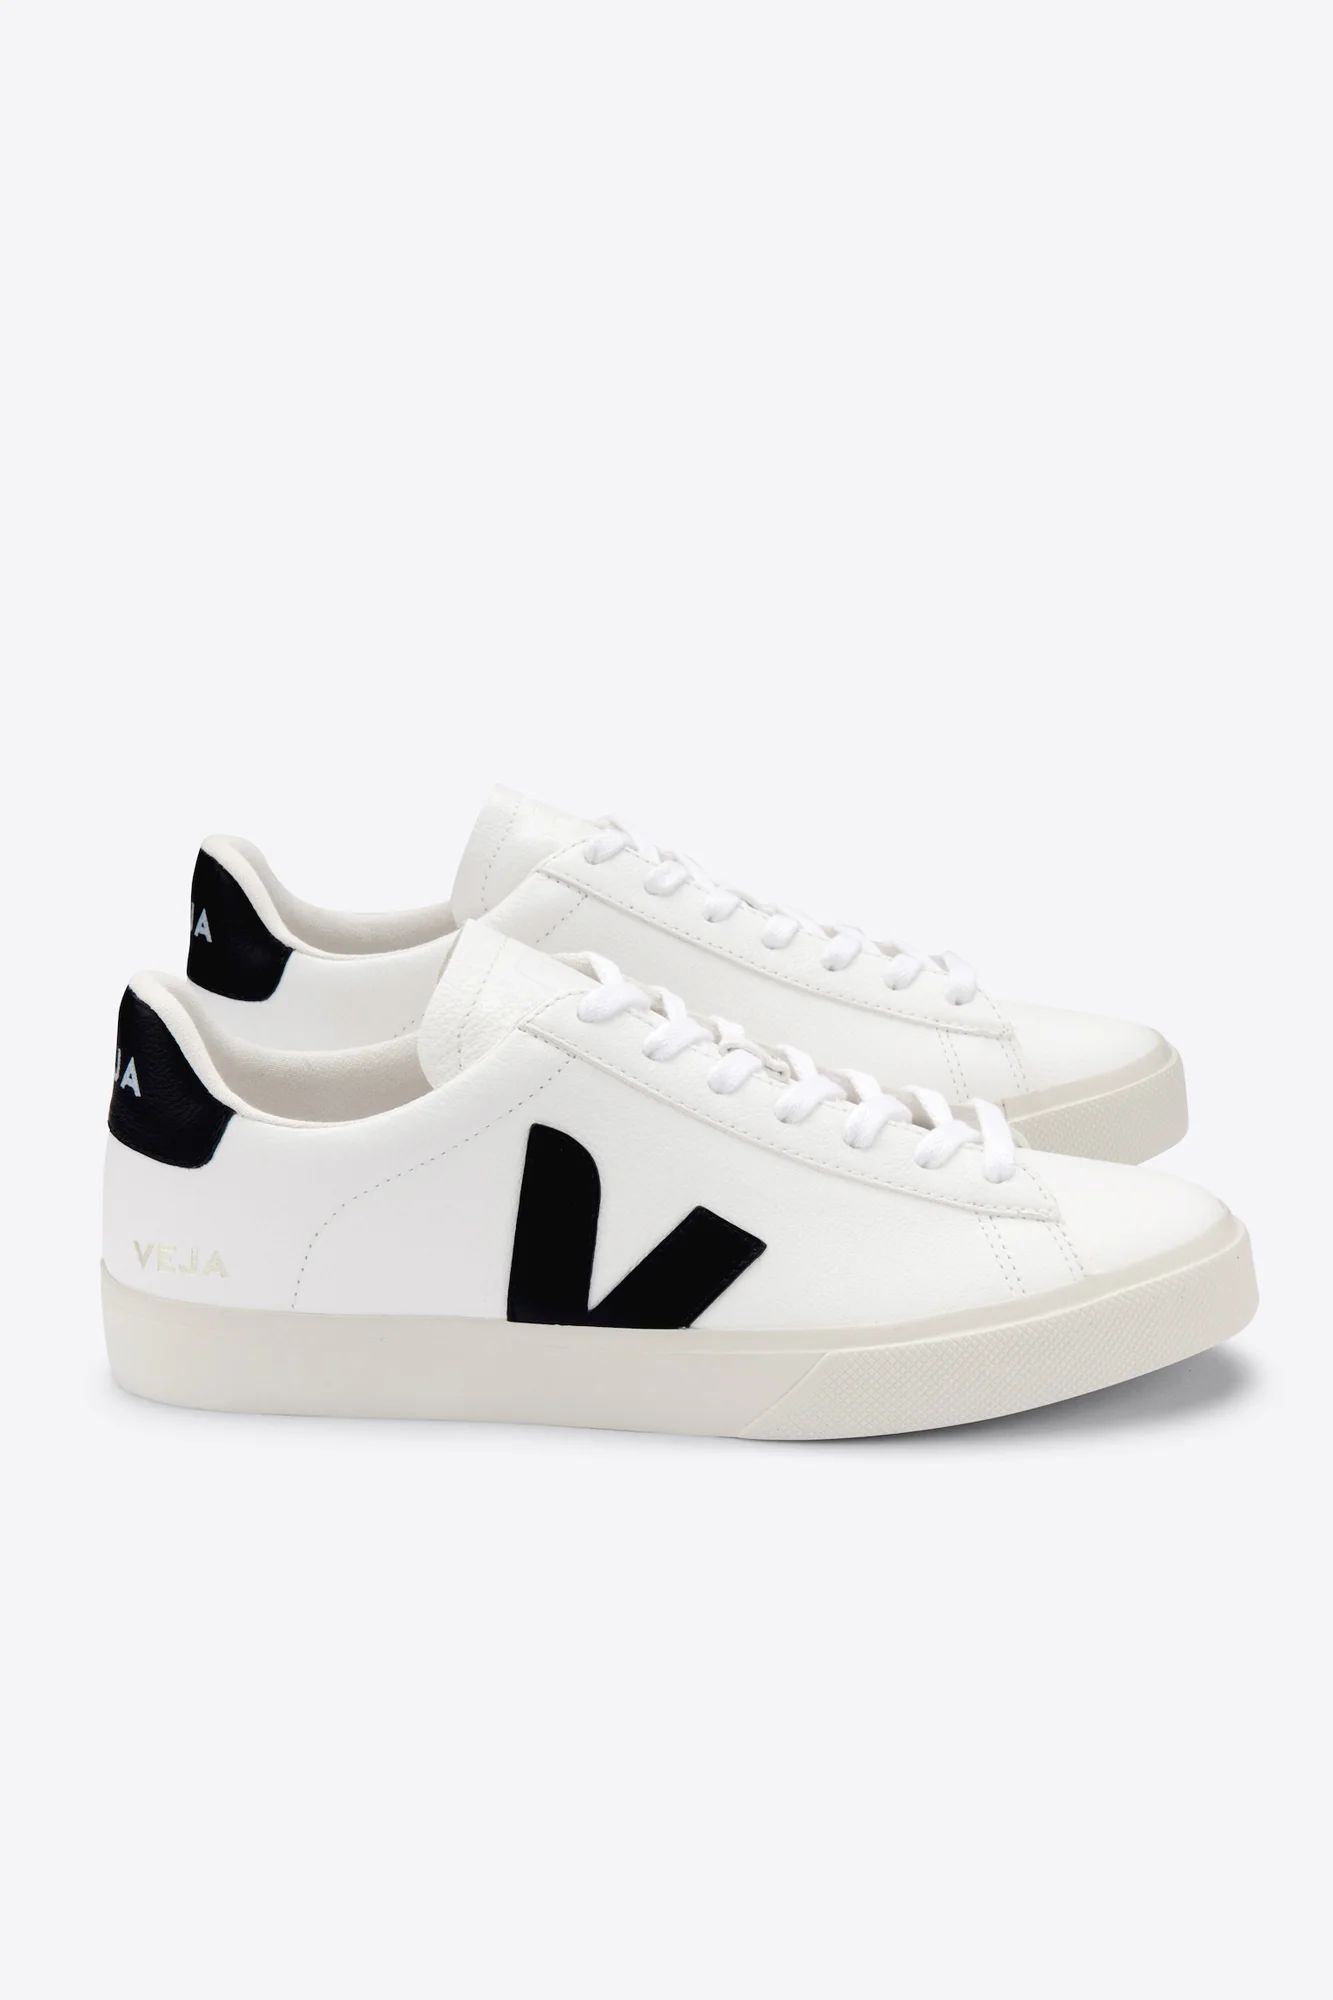 Veja Campo Sneaker - White and Black | Amour Vert